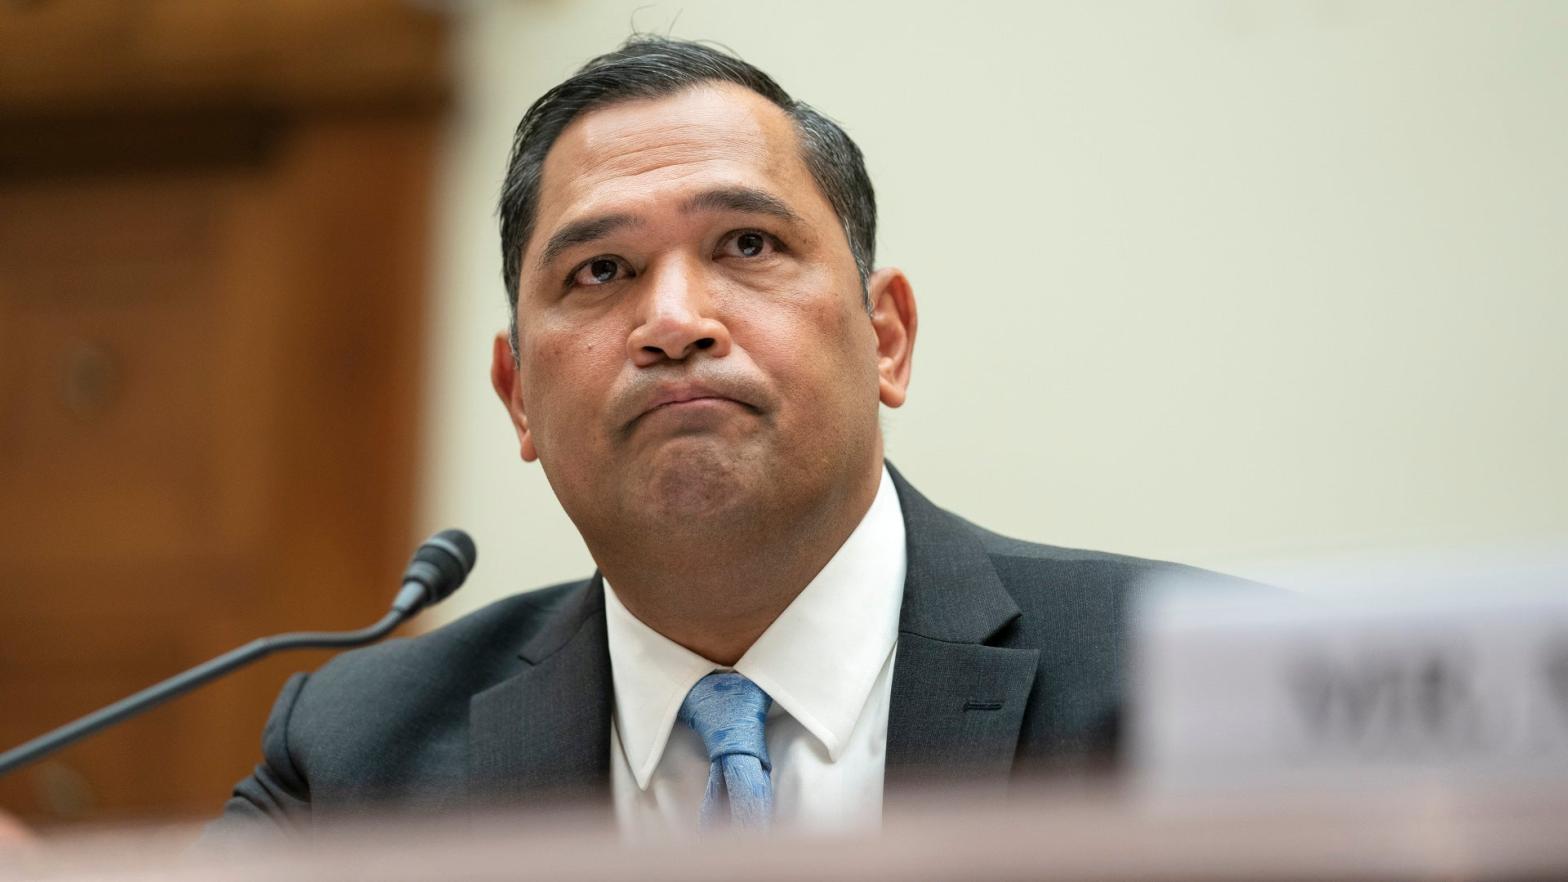 Brian Bulatao attending a House Foreign Affairs Committee hearing on September 16, 2020. (Photo: Pool, Getty Images)